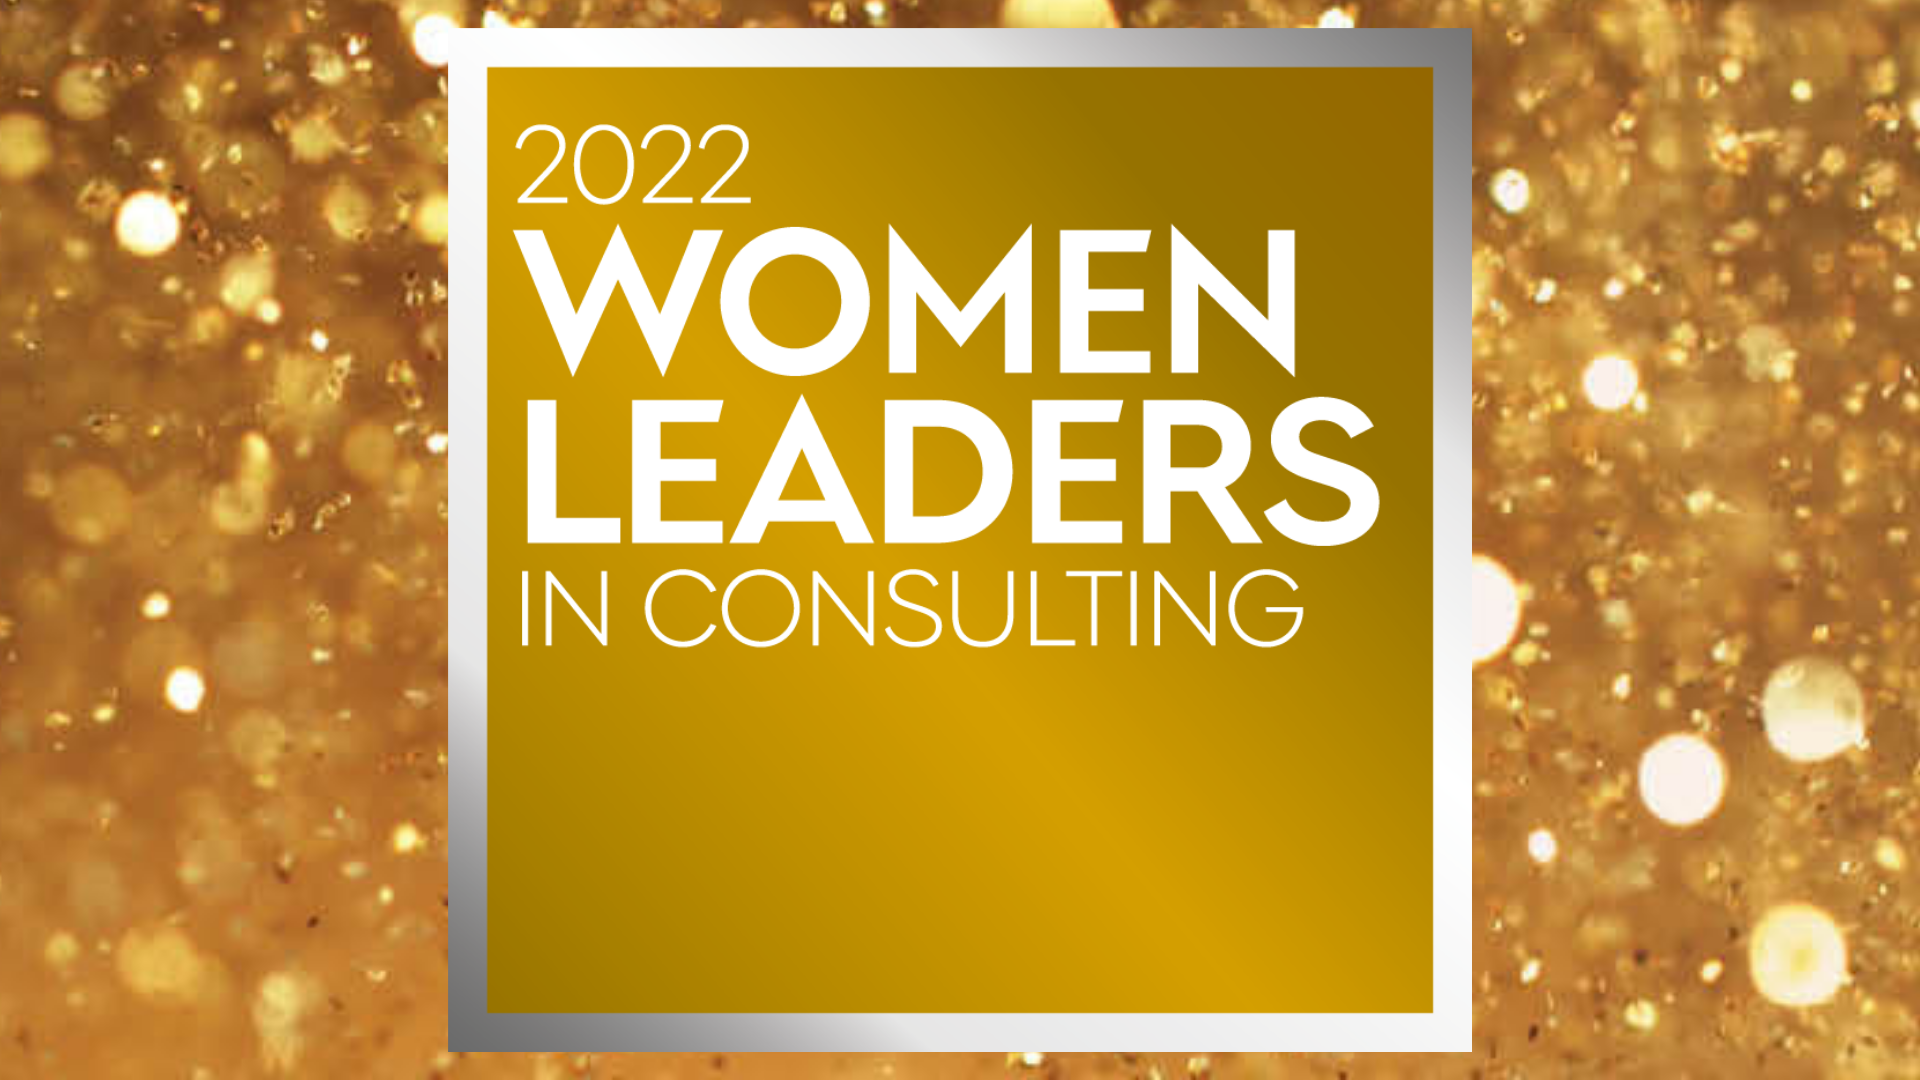 Women Leaders in Consulting Awards 2022 - Nominations Open